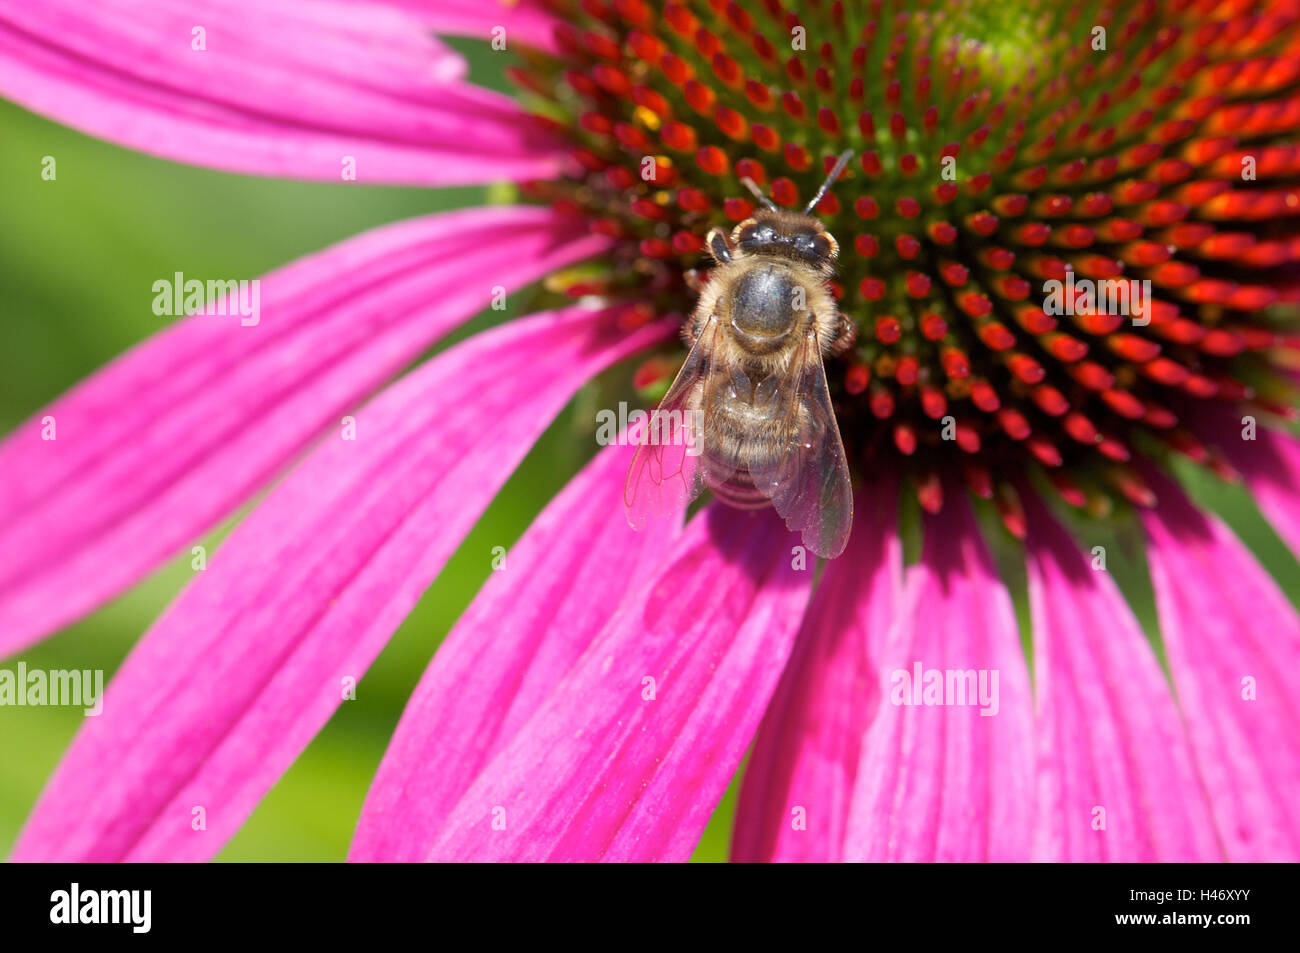 Bee on Echinacea blossom, close-up, Stock Photo